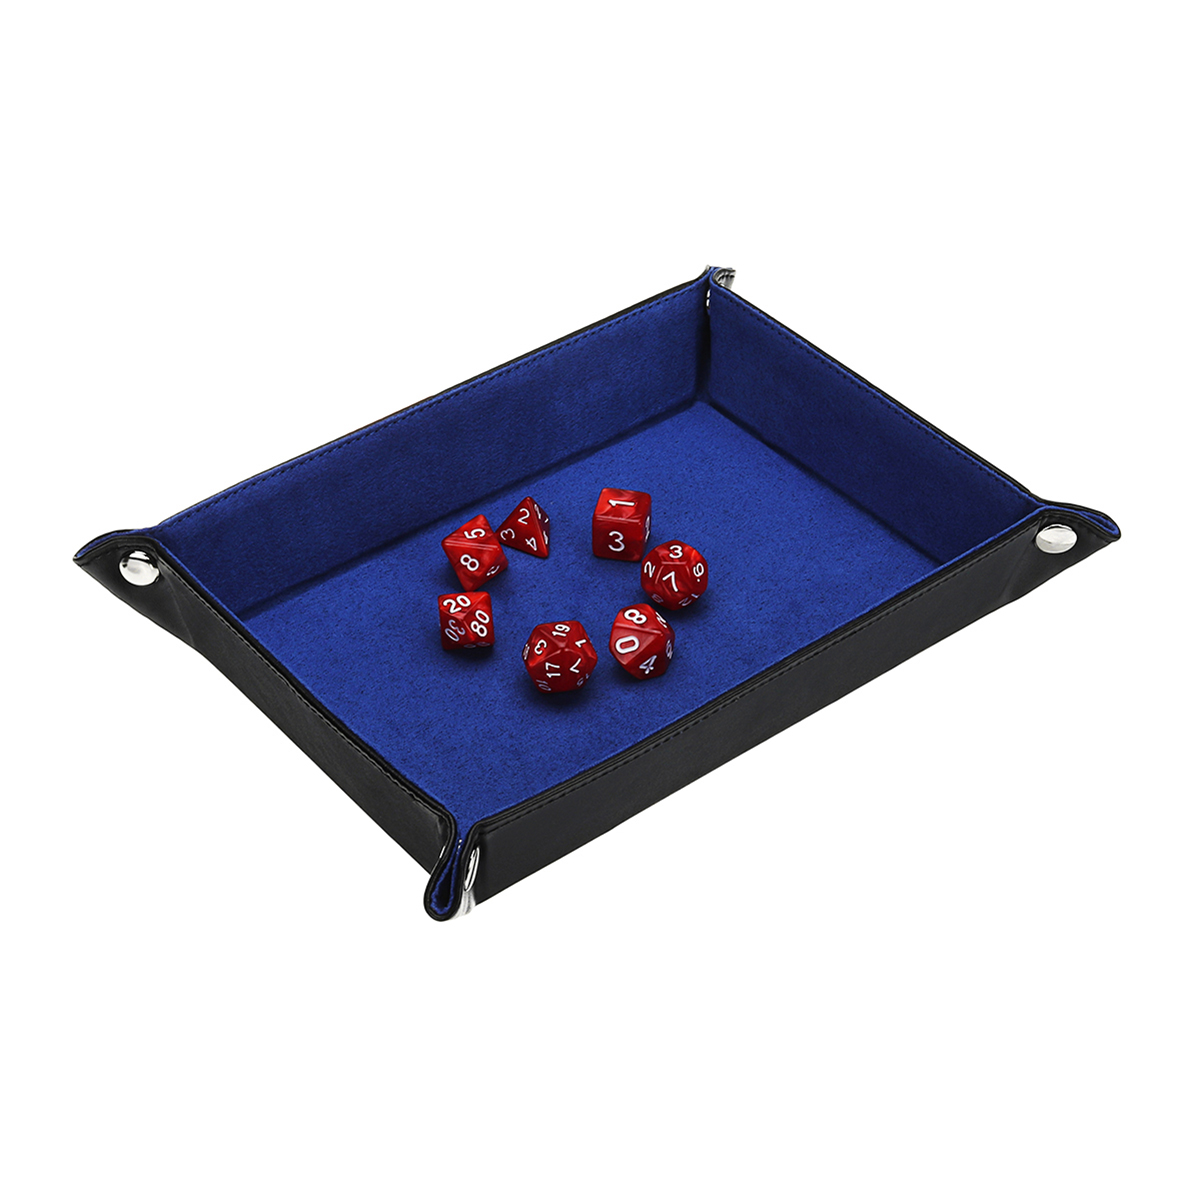 Portable-Fold-Dice-Tray-PU-Leather-with-7-Polyhedral-Dice-for-Tabletop-Dice-Games-1346582-5